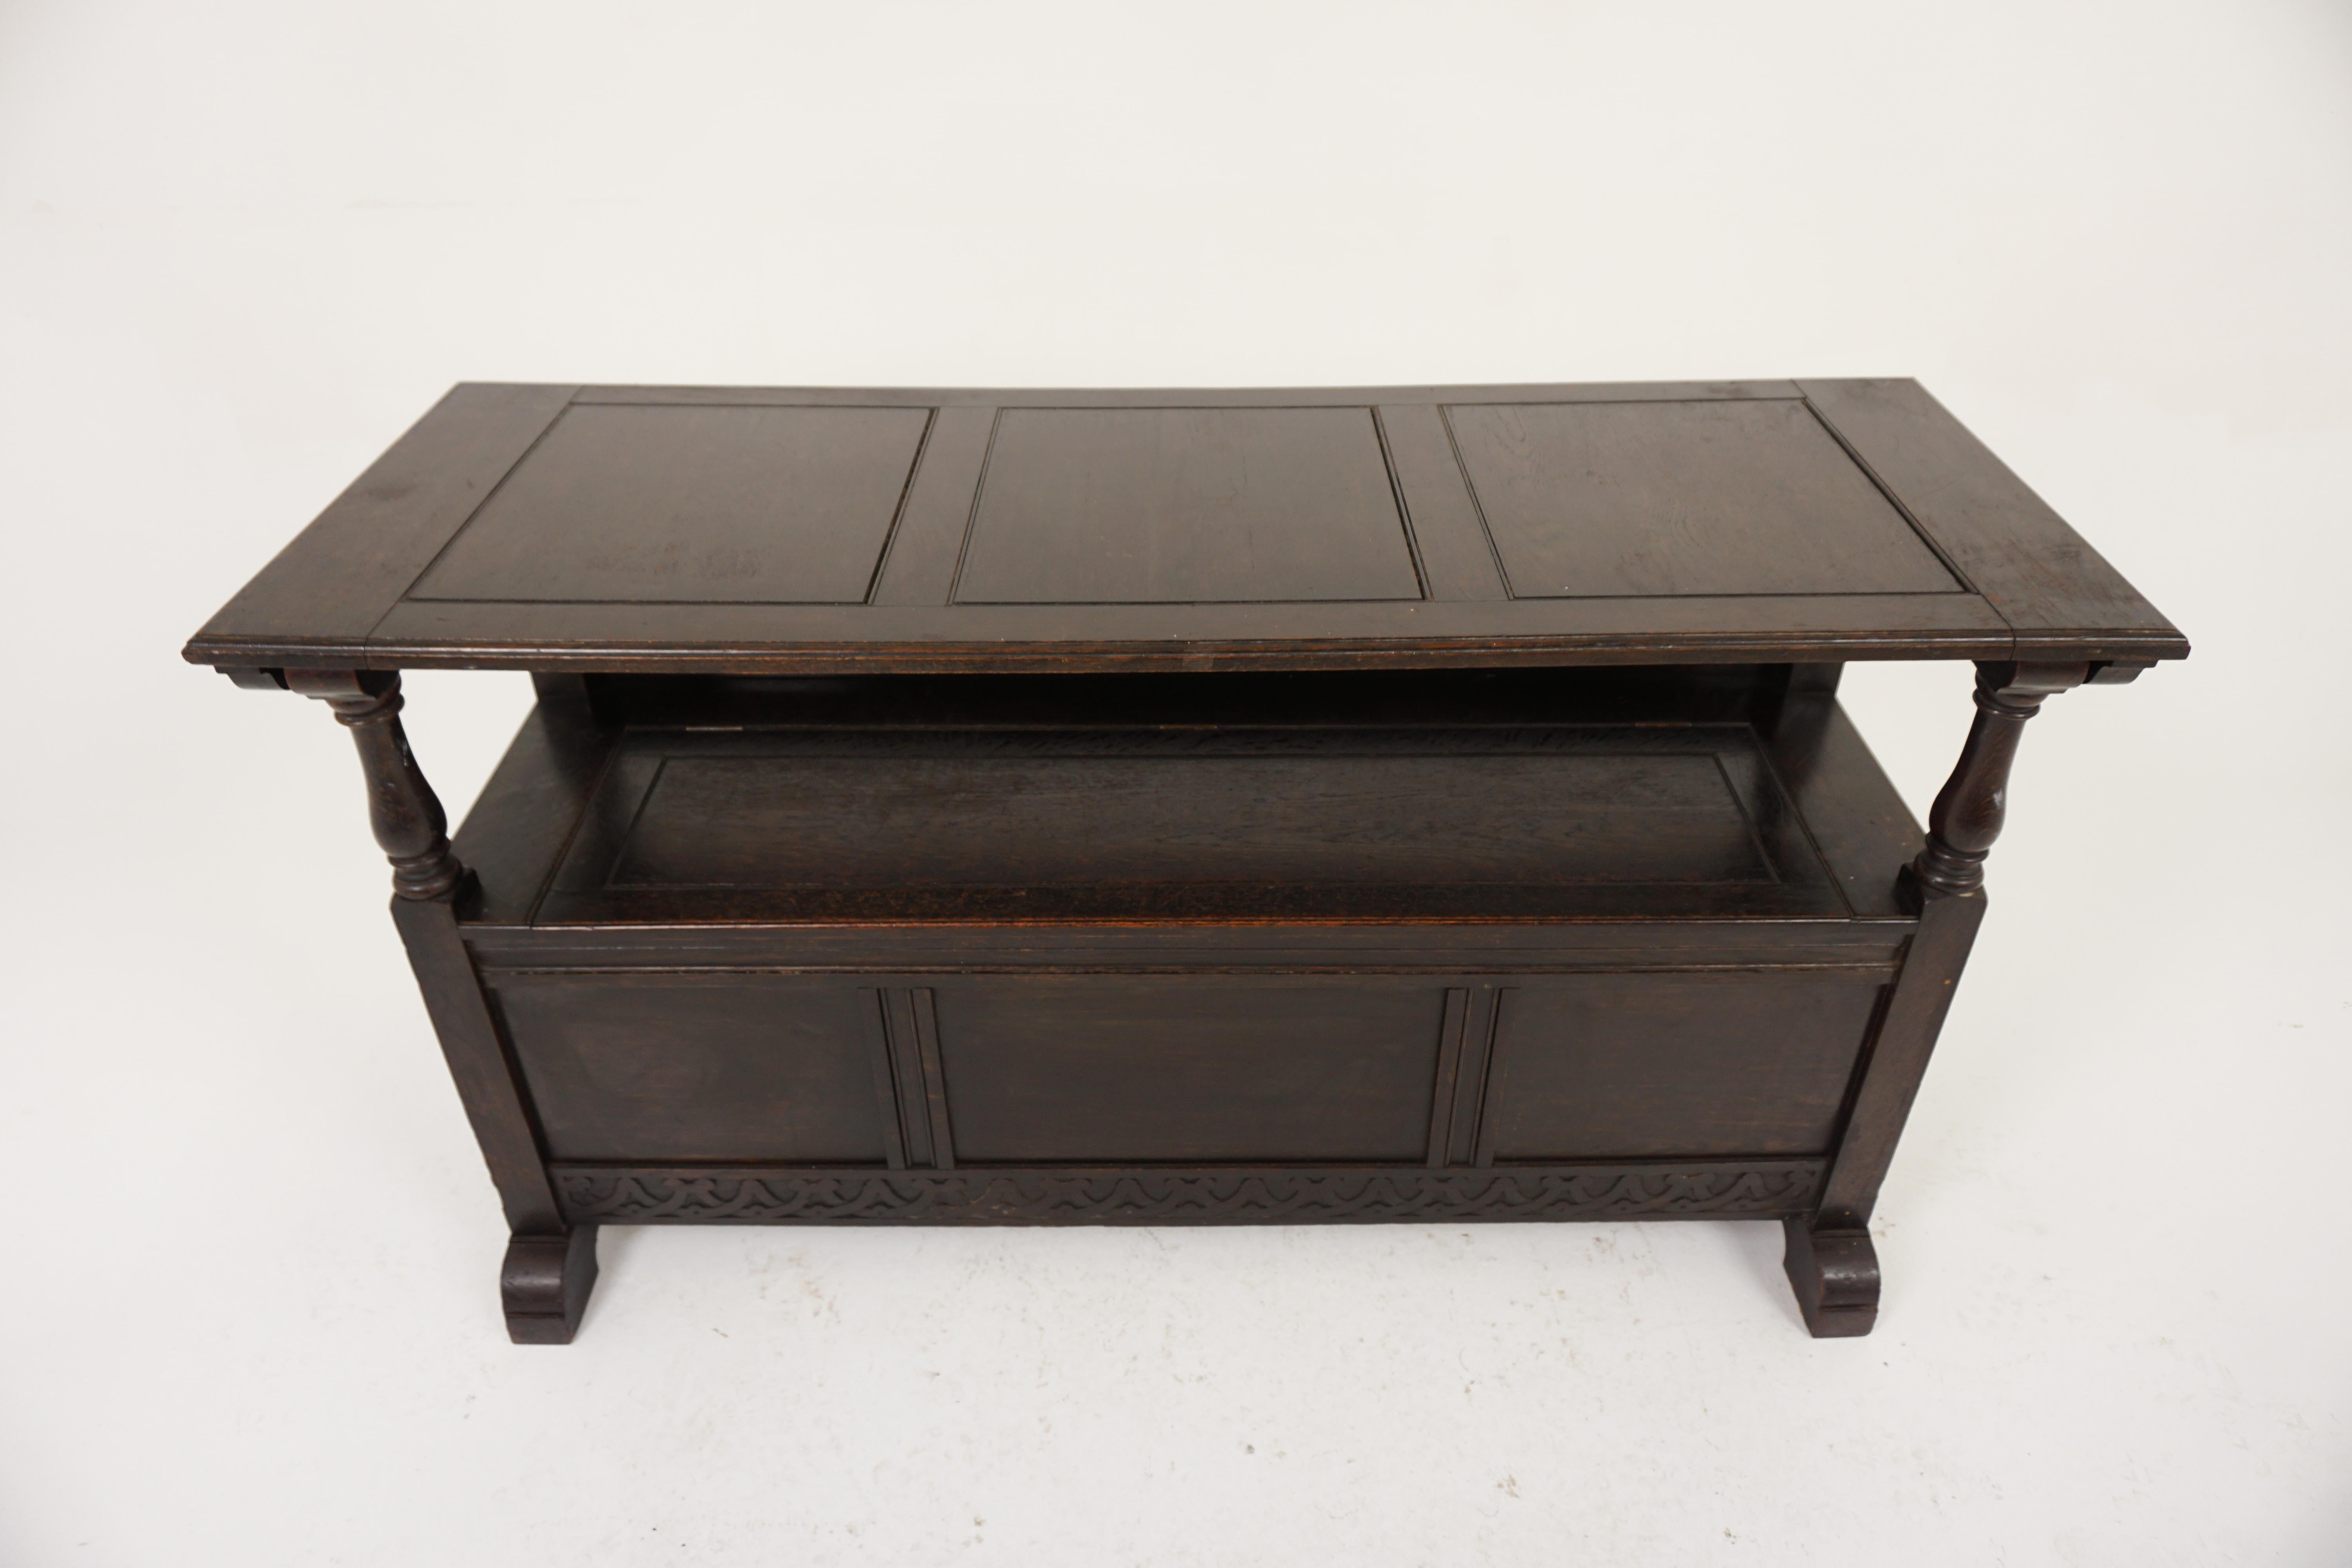 Hand-Crafted Antique Oak Bench, Hall Seat, Monks Bench, Settle, Scotland 1900, H988